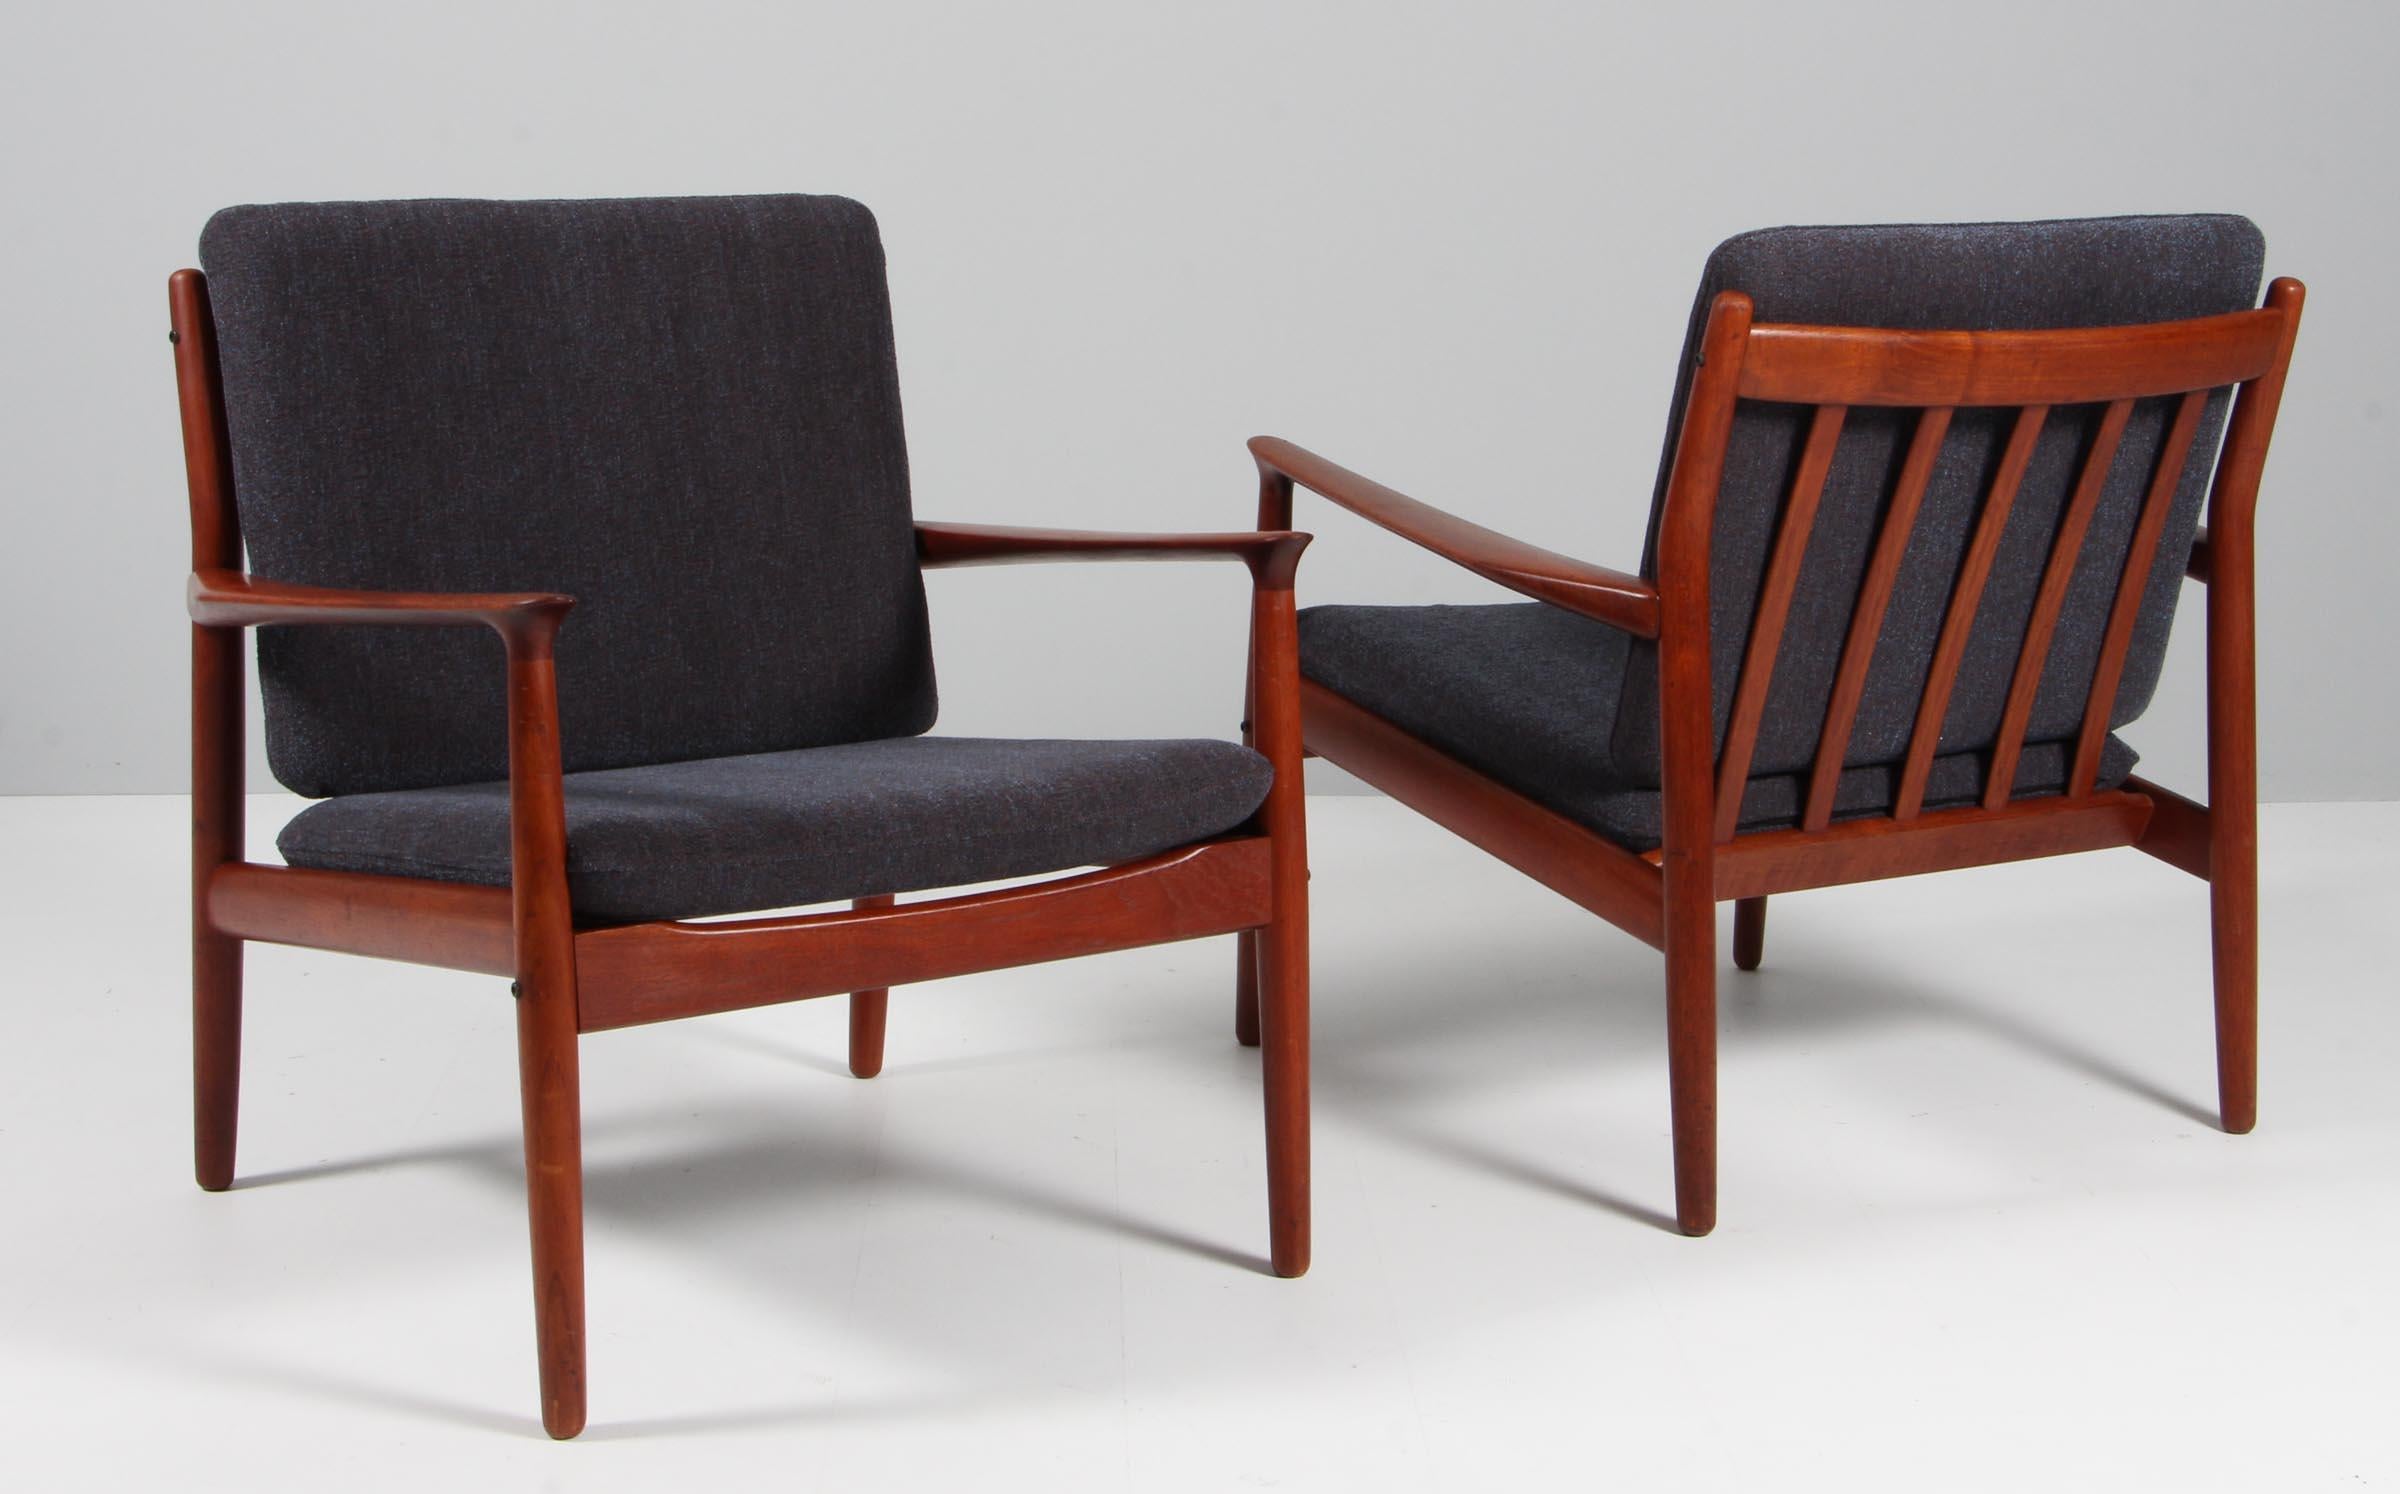 Pair of Grete Jalk Lounge Chairs with Frame of Teak, Textured Fabric 1